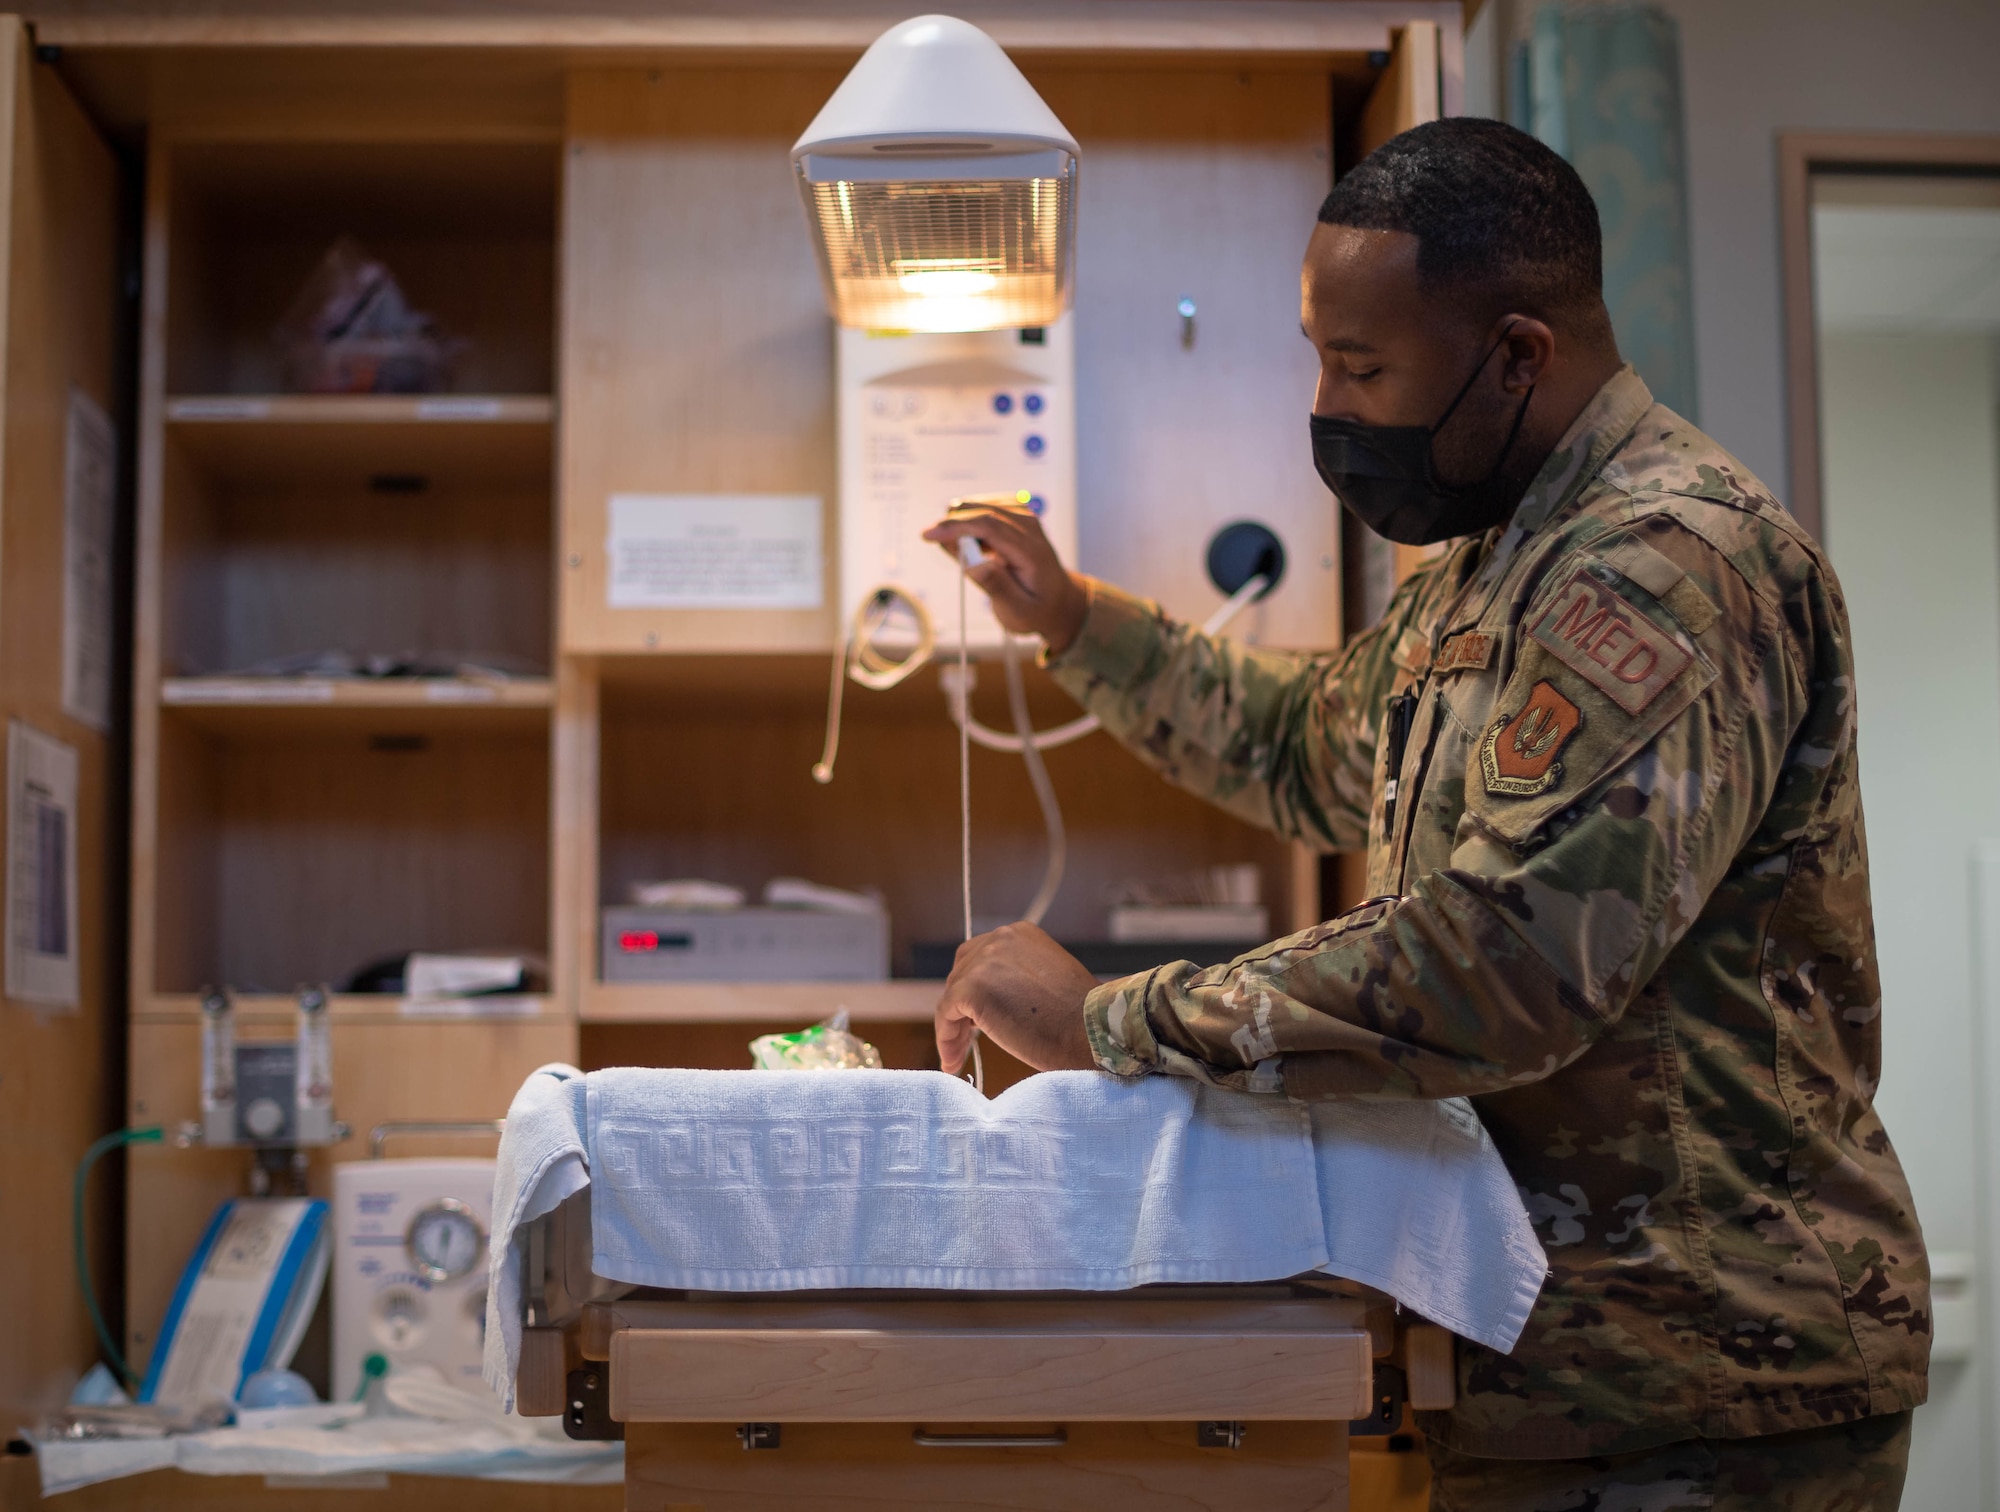 U.S. Air Force Staff Sgt. Lamaar Melvin, 86th Medical Squadron Labor and Delivery supervisor, prepares a neonatal warmer at the Landstuhl Regional Medical Center, Nov. 9, 2021. When a child is born at LRMC with health issues such as trouble breathing or is in overall poor condition, the child can be brought to the neonatal warmer where a practitioner can perform resuscitative measures, heat therapy, or assist the child’s breathing. (U.S. Air Force photo by Airman Jared Lovett)